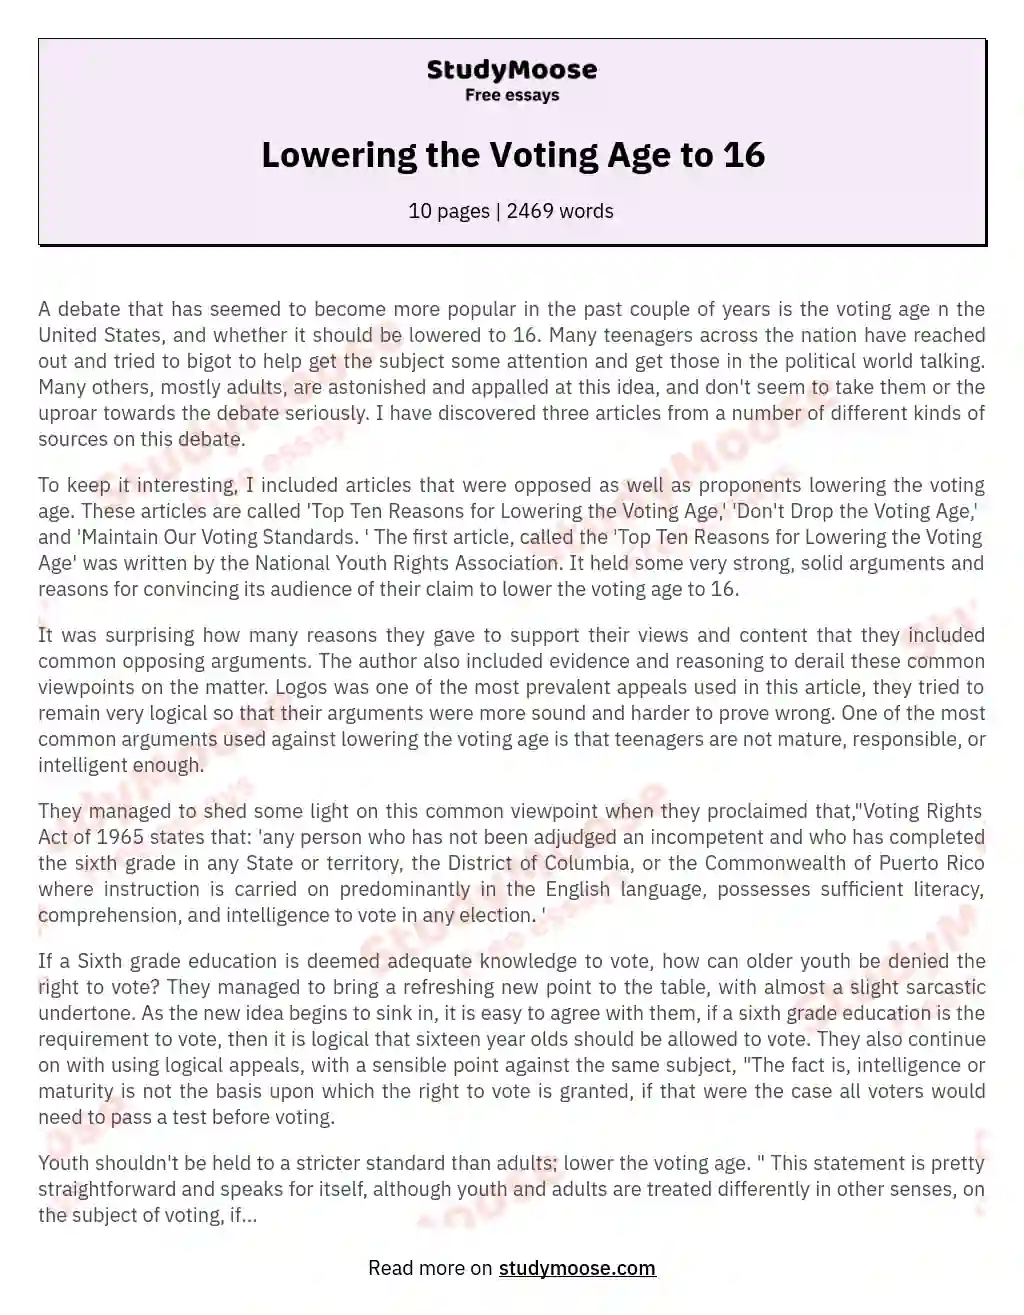 Debate on Lowering Voting Age: Perspectives and Arguments essay